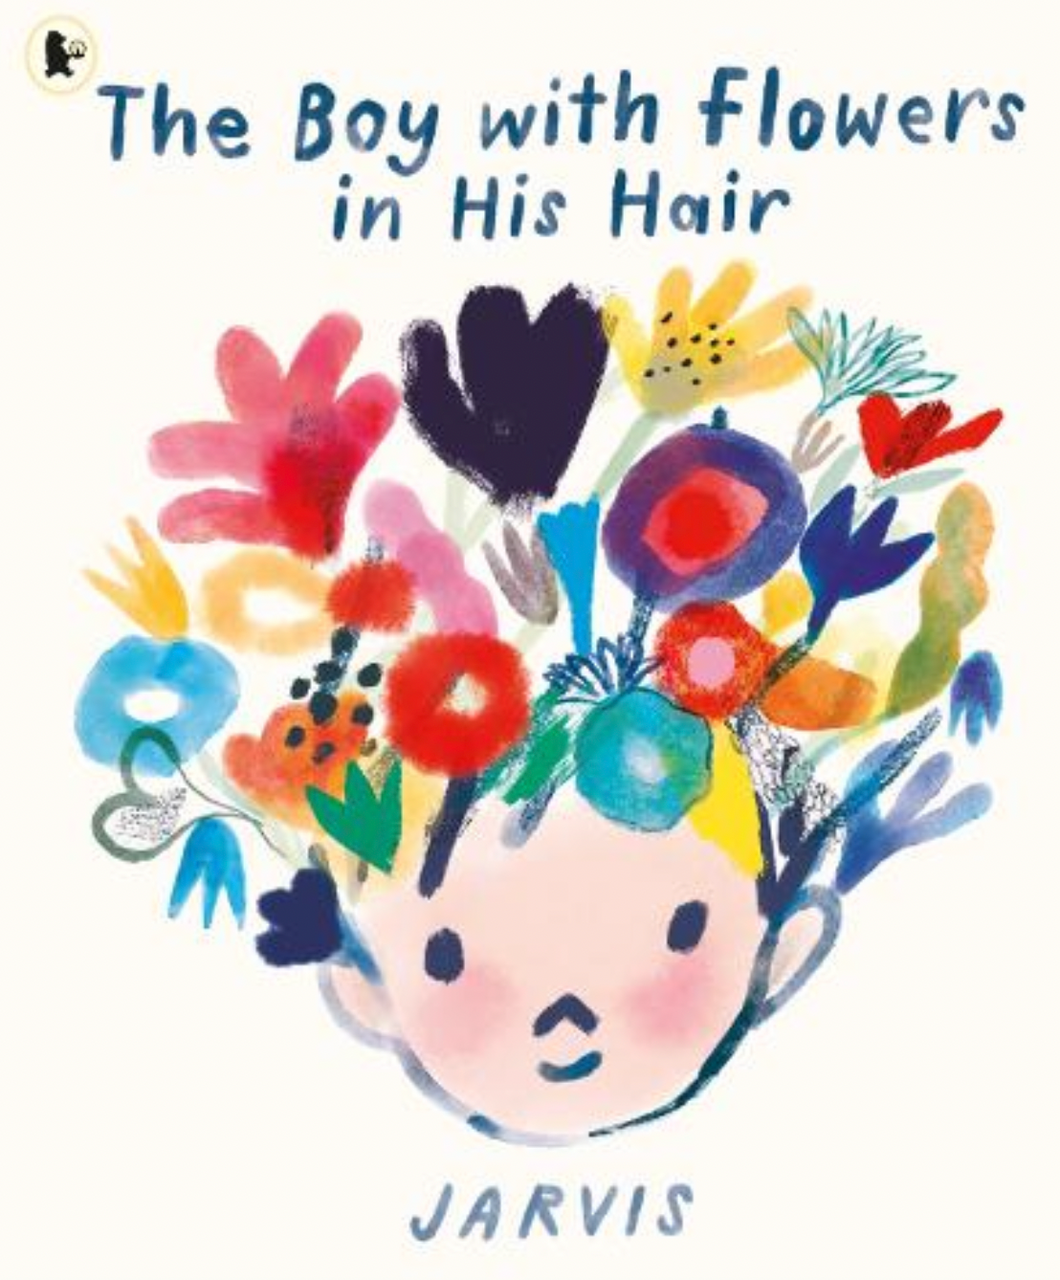 The Boy with Flowers in His Hair